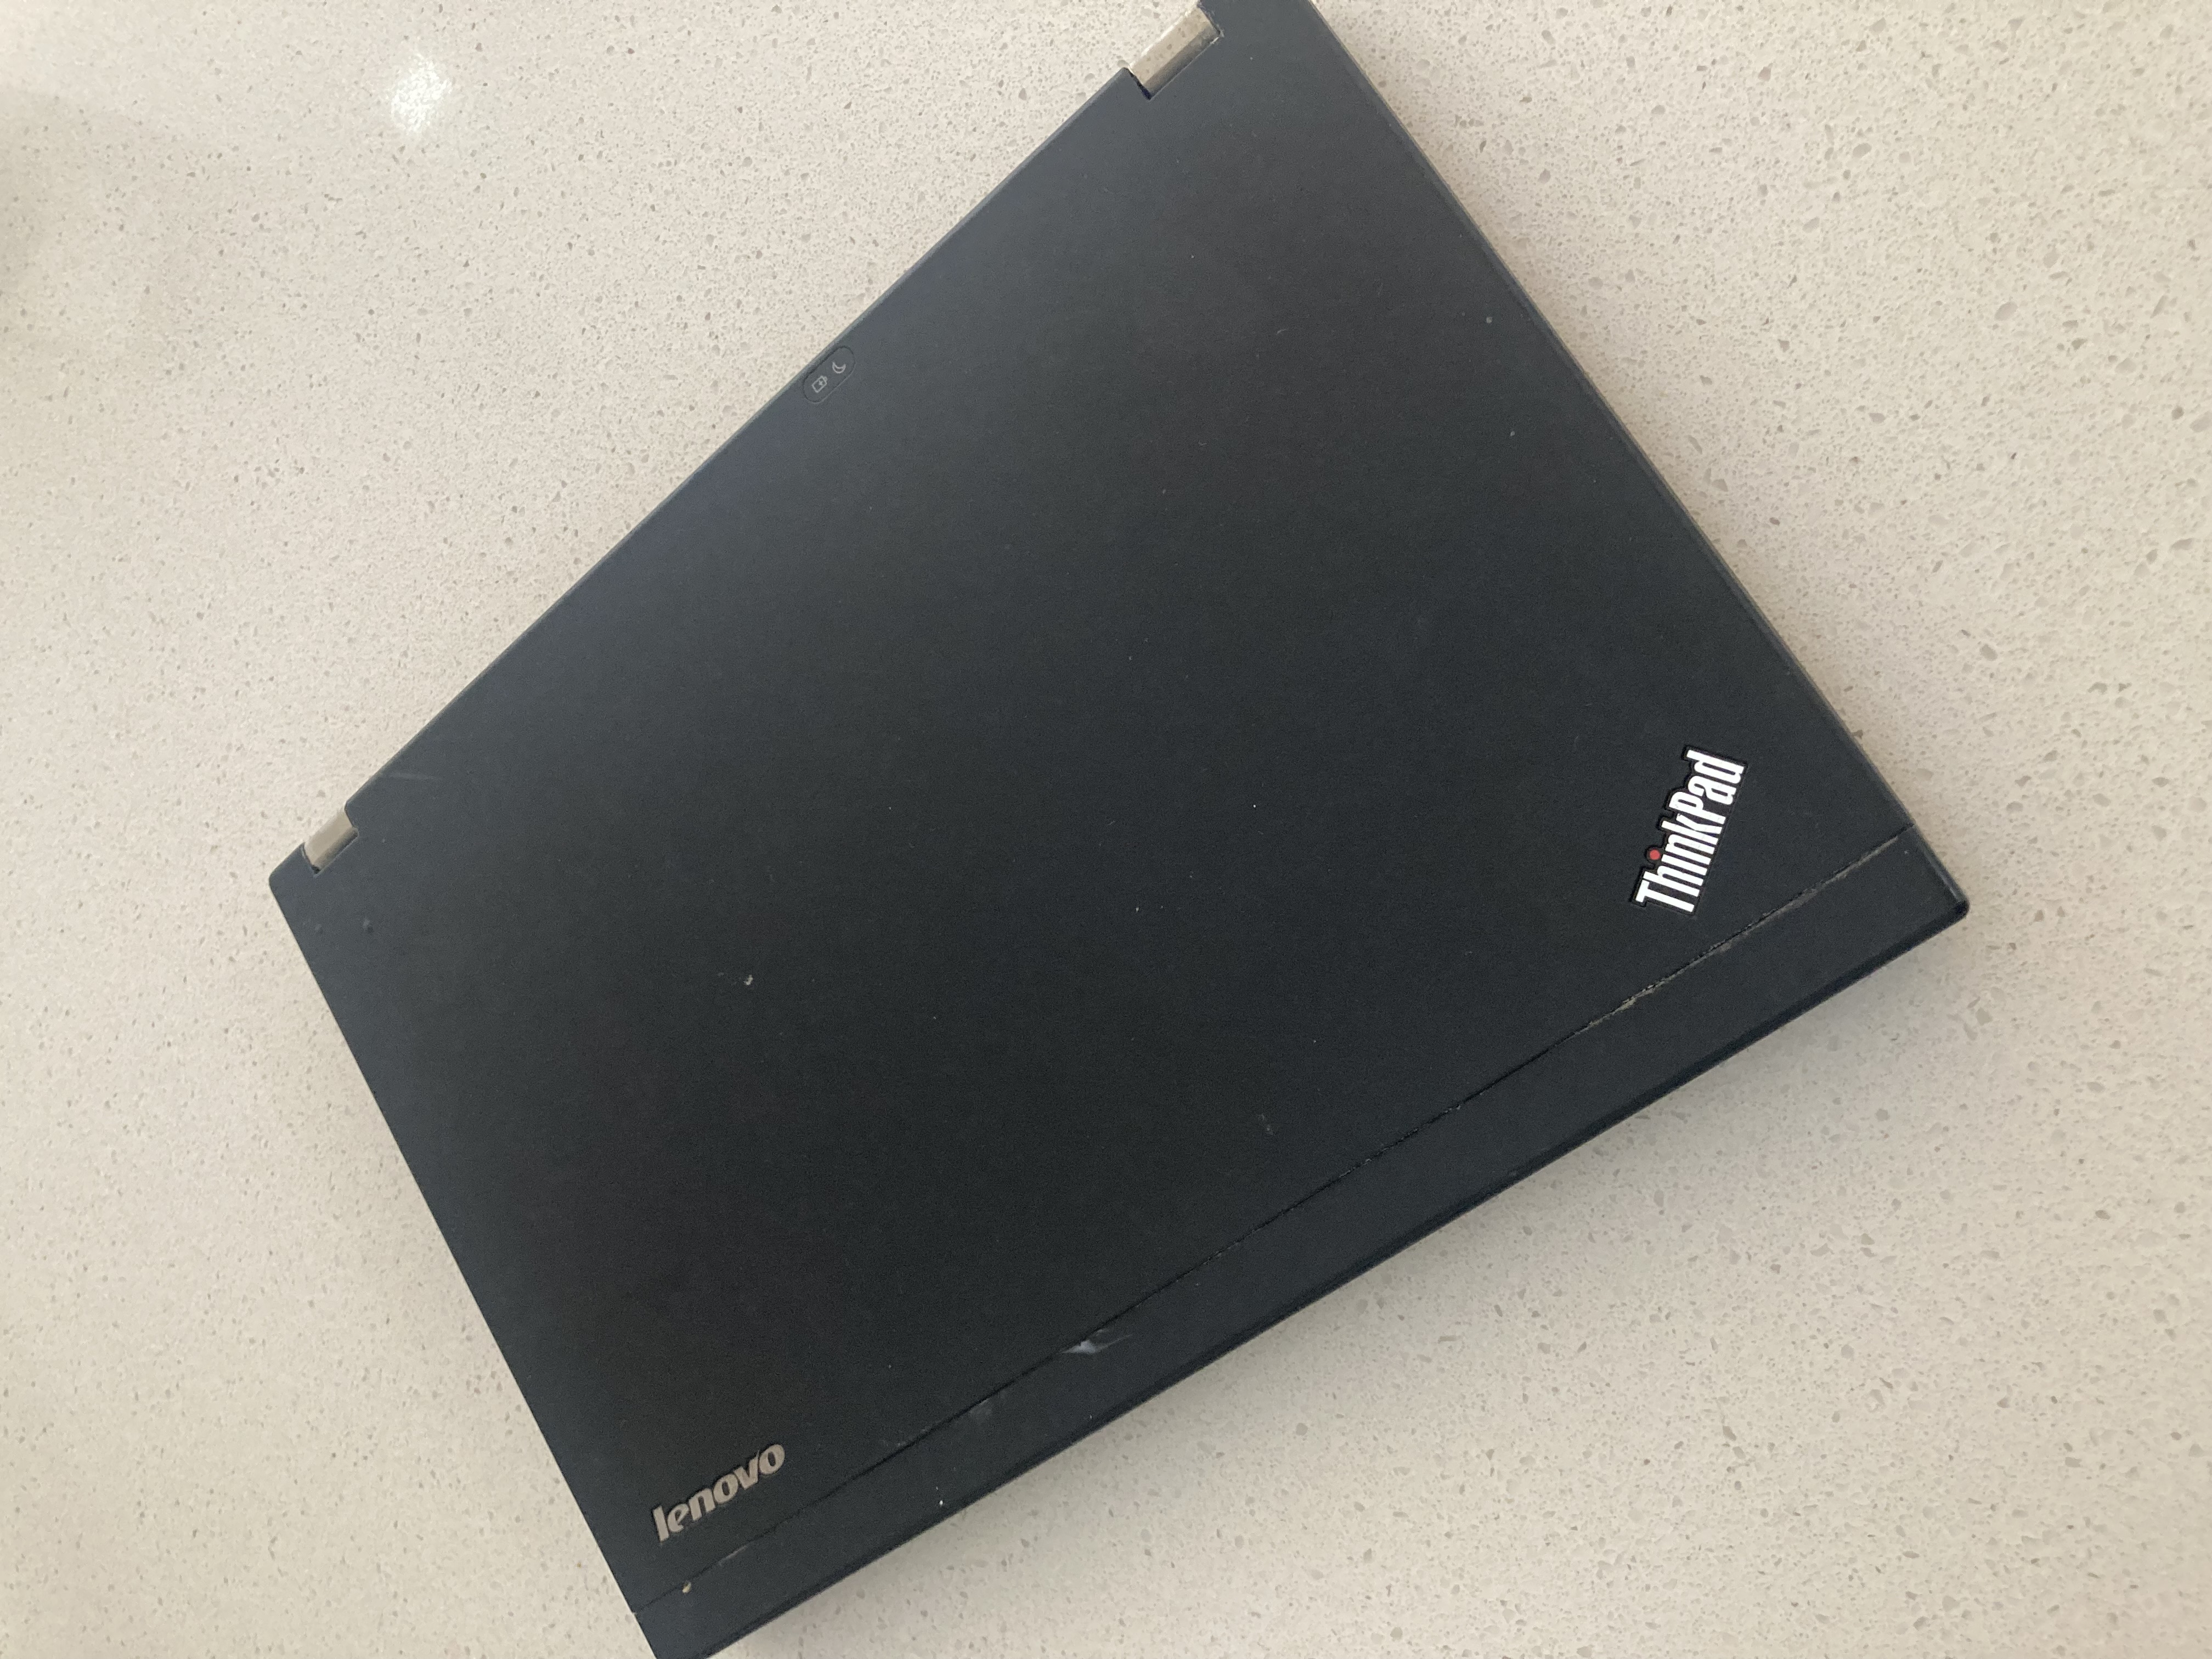 The thinkpad x230 with the lid
closed